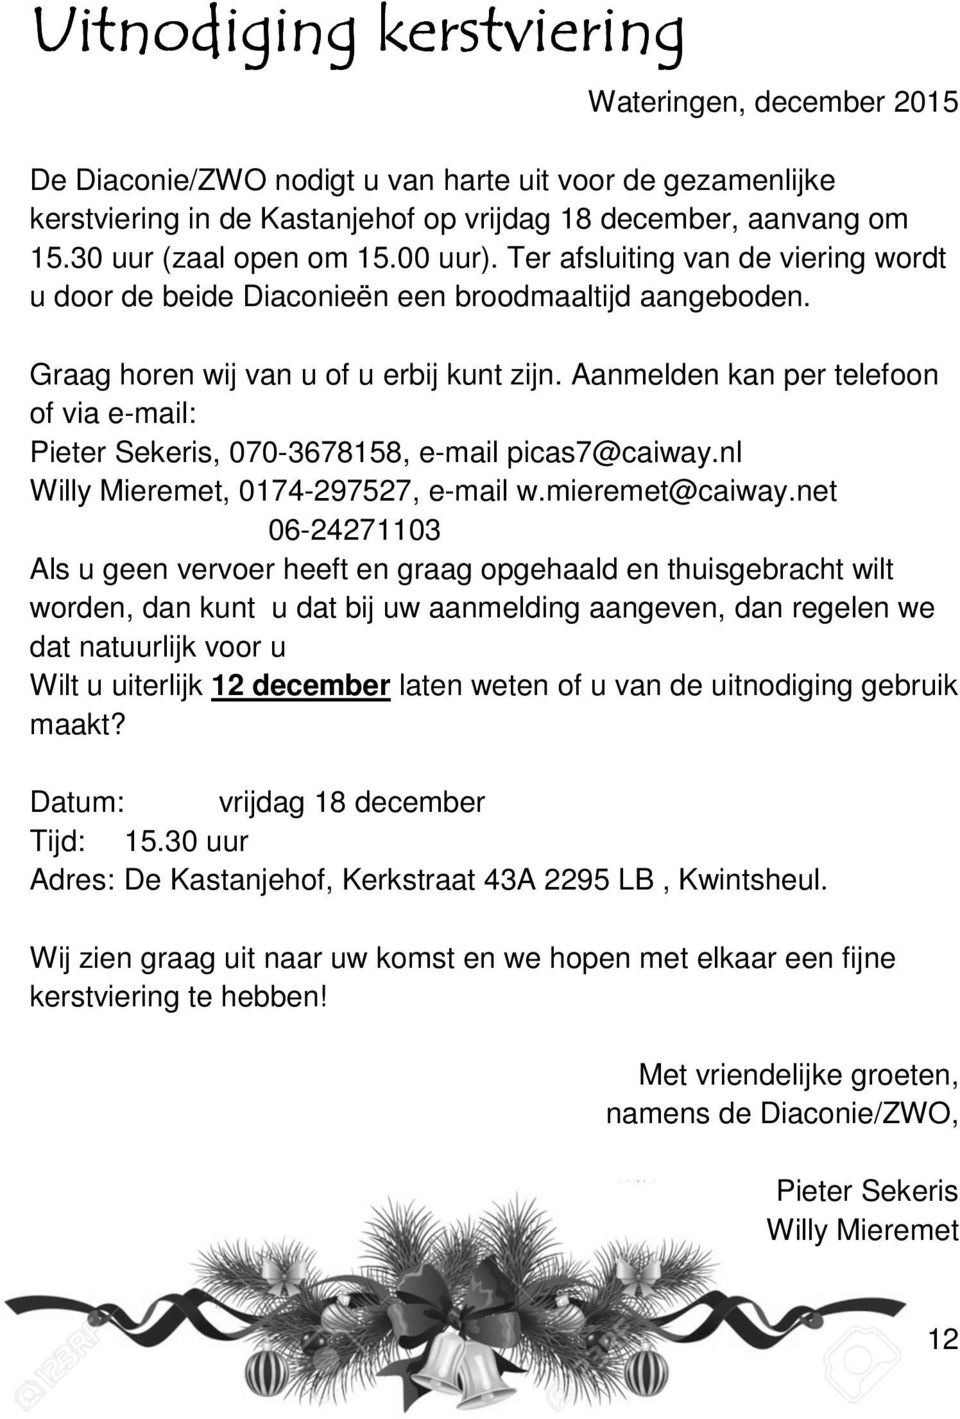 Aanmelden kan per telefoon of via e-mail: Pieter Sekeris, 070-3678158, e-mail picas7@caiway.nl Willy Mieremet, 0174-297527, e-mail w.mieremet@caiway.